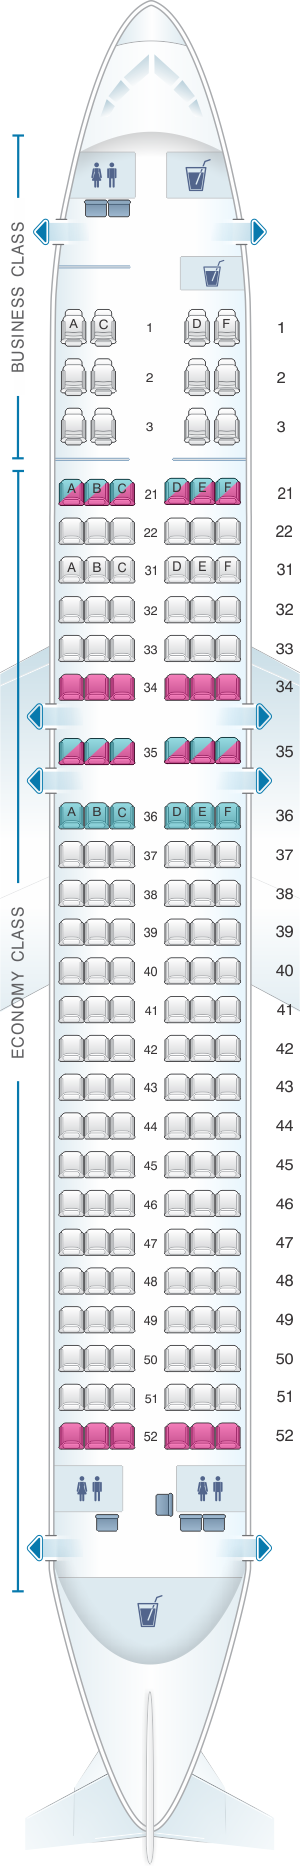 Philippine Airlines Seat Map A321 Elcho Table